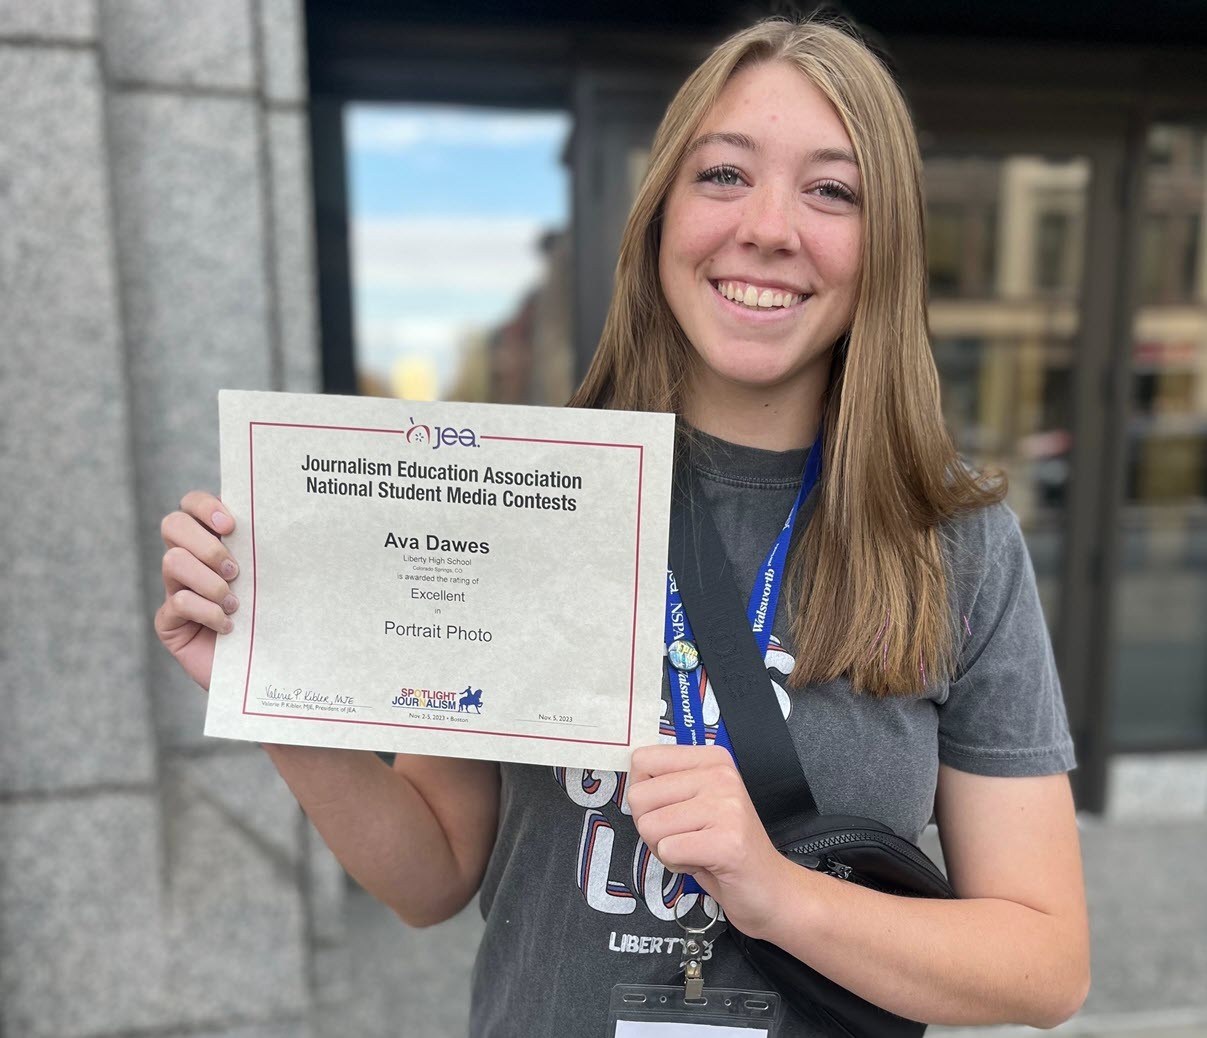 Liberty yearbook student Ava Dawes stands with a certificate from the Journalism Education Association National Student Media Contest for the Excellent Portrait Photo.